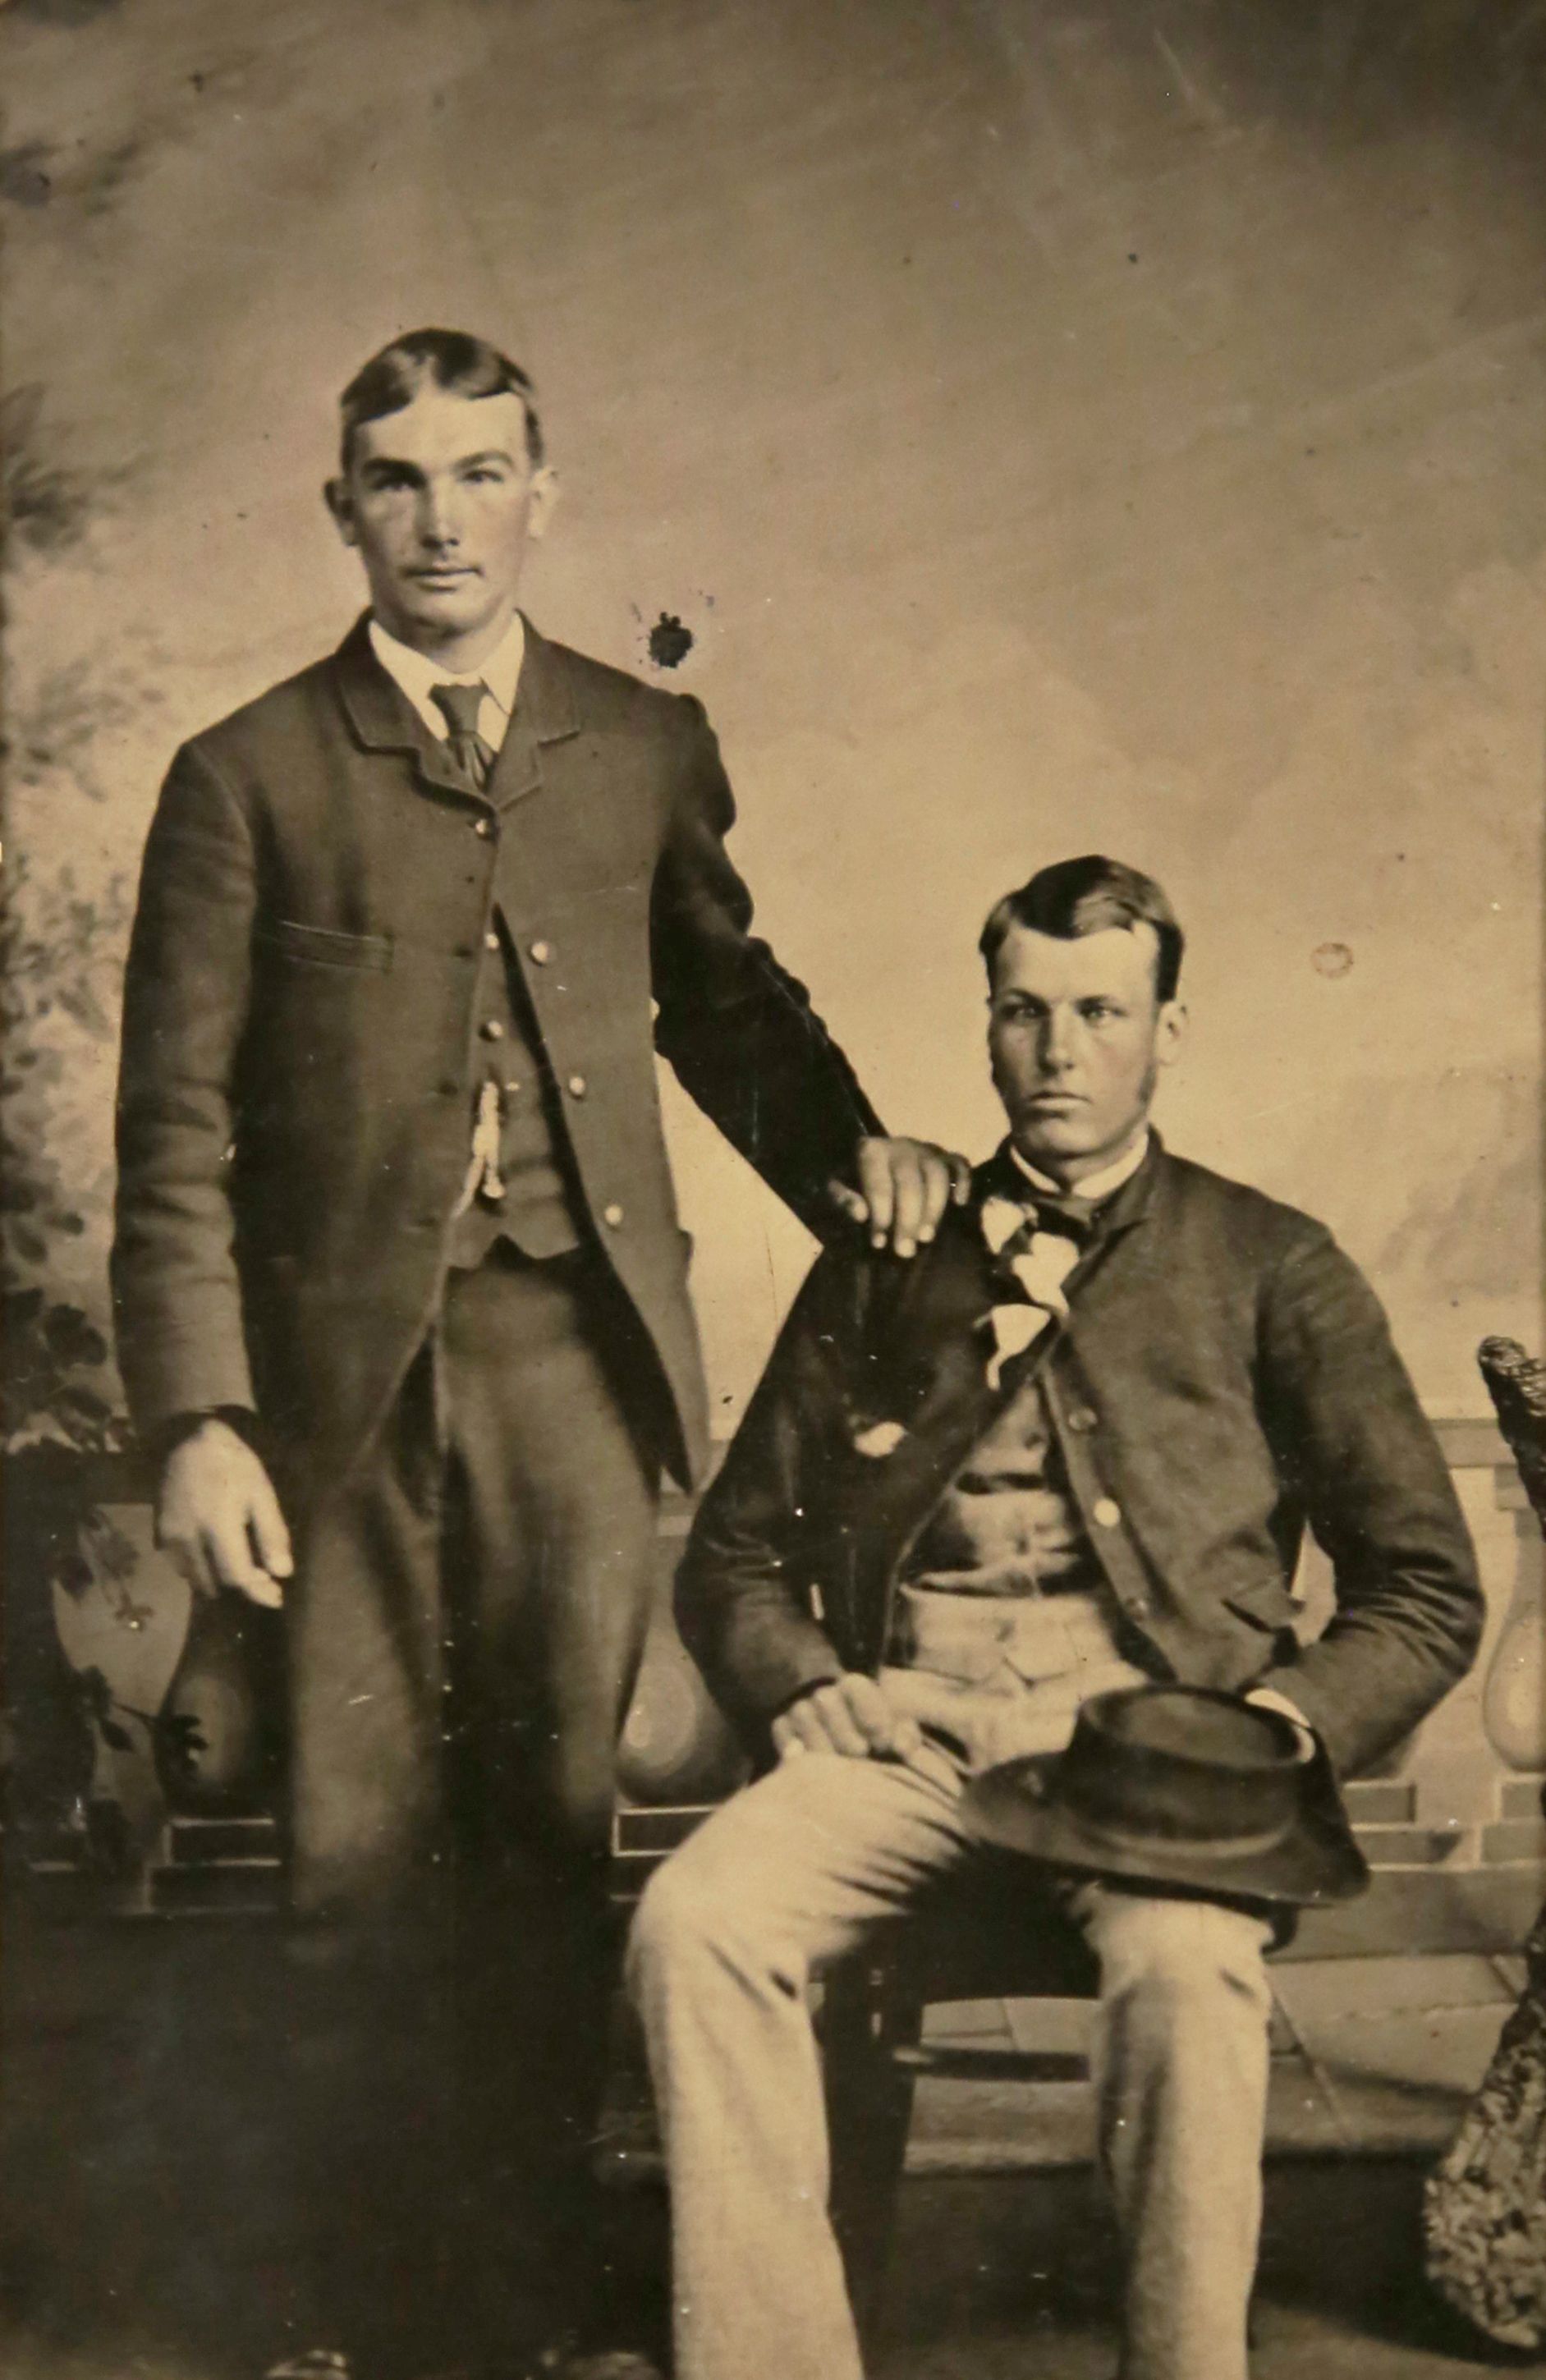 Portrait of two men. One sits holding his hat on his leg and the other other stands, resting his hand on the shoulder of the seated man